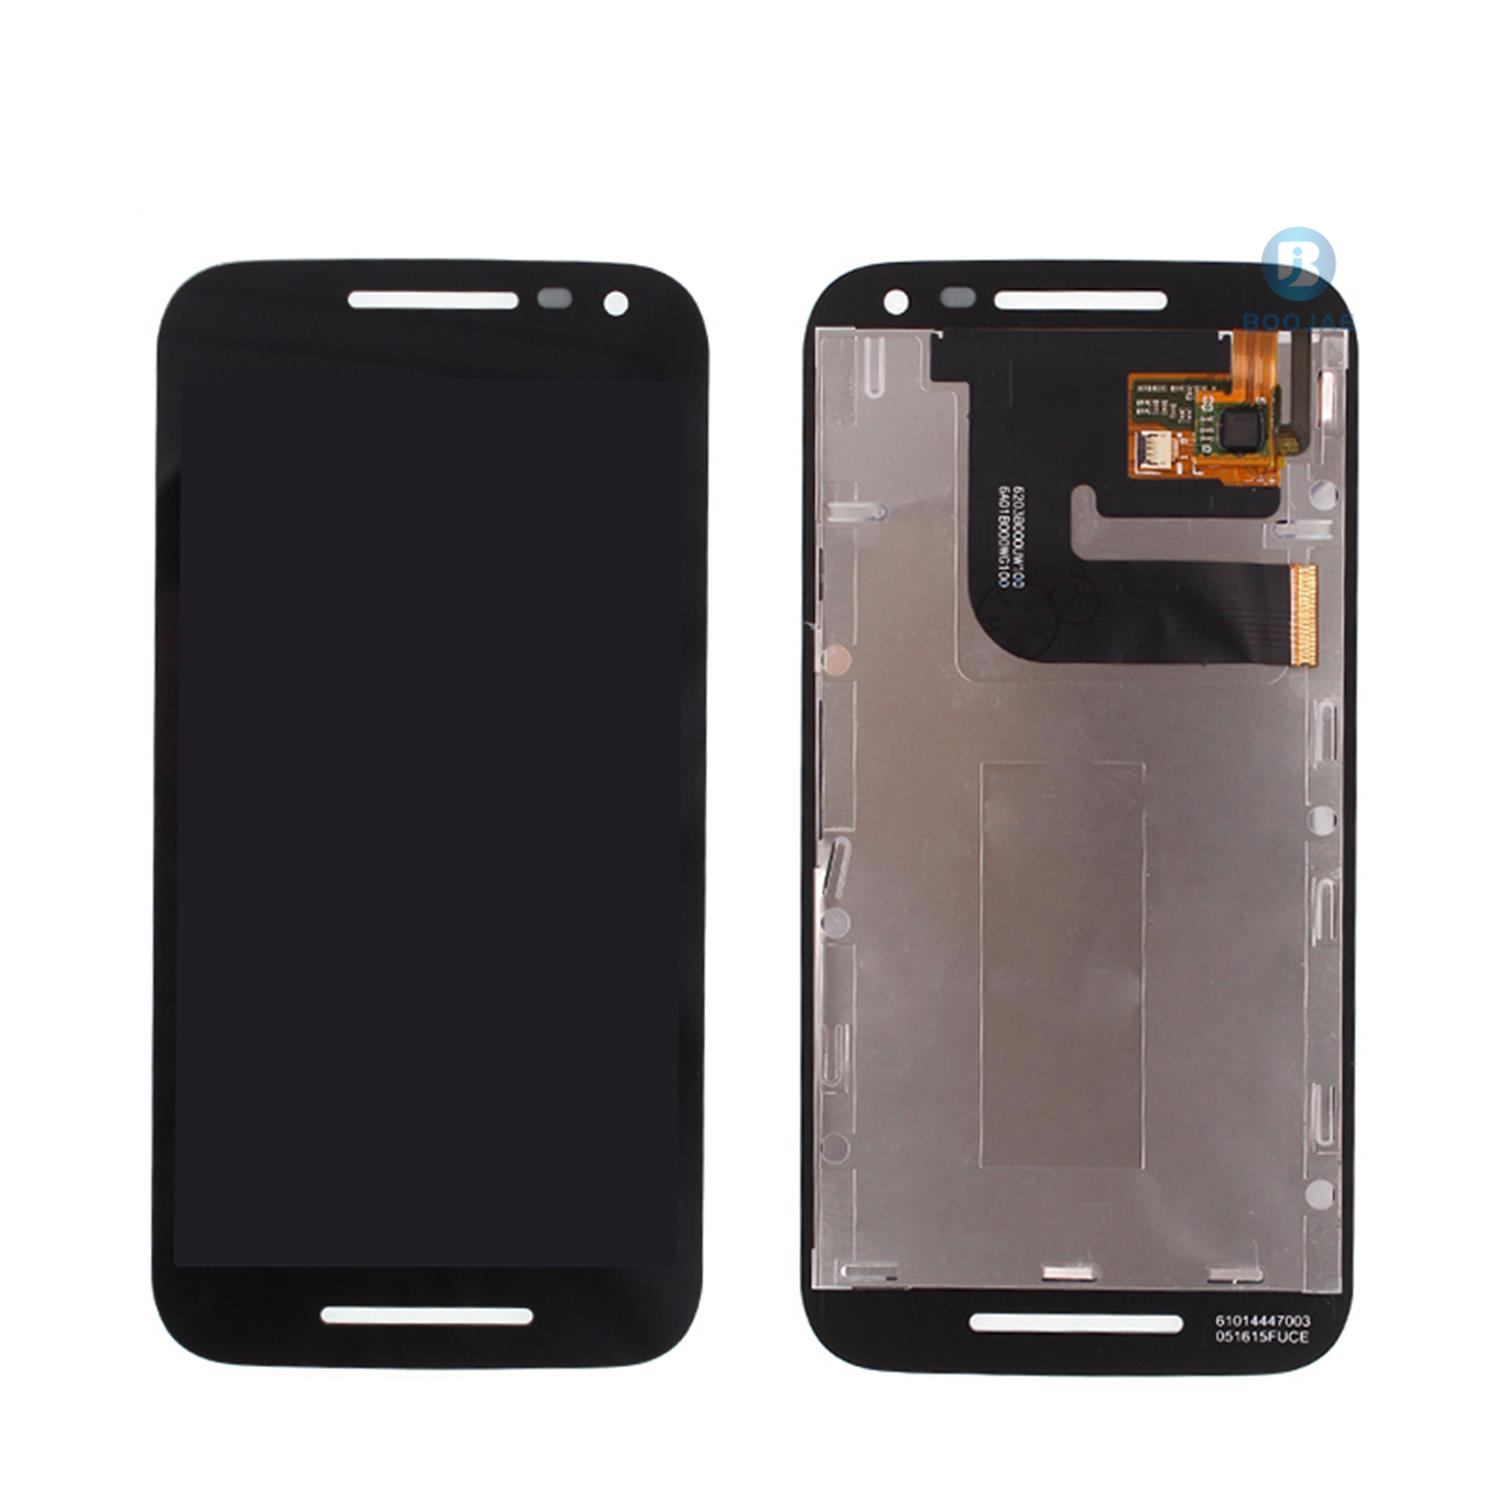 Motorola Moto G3 LCD Screen Display, Lcd Assembly Replacement